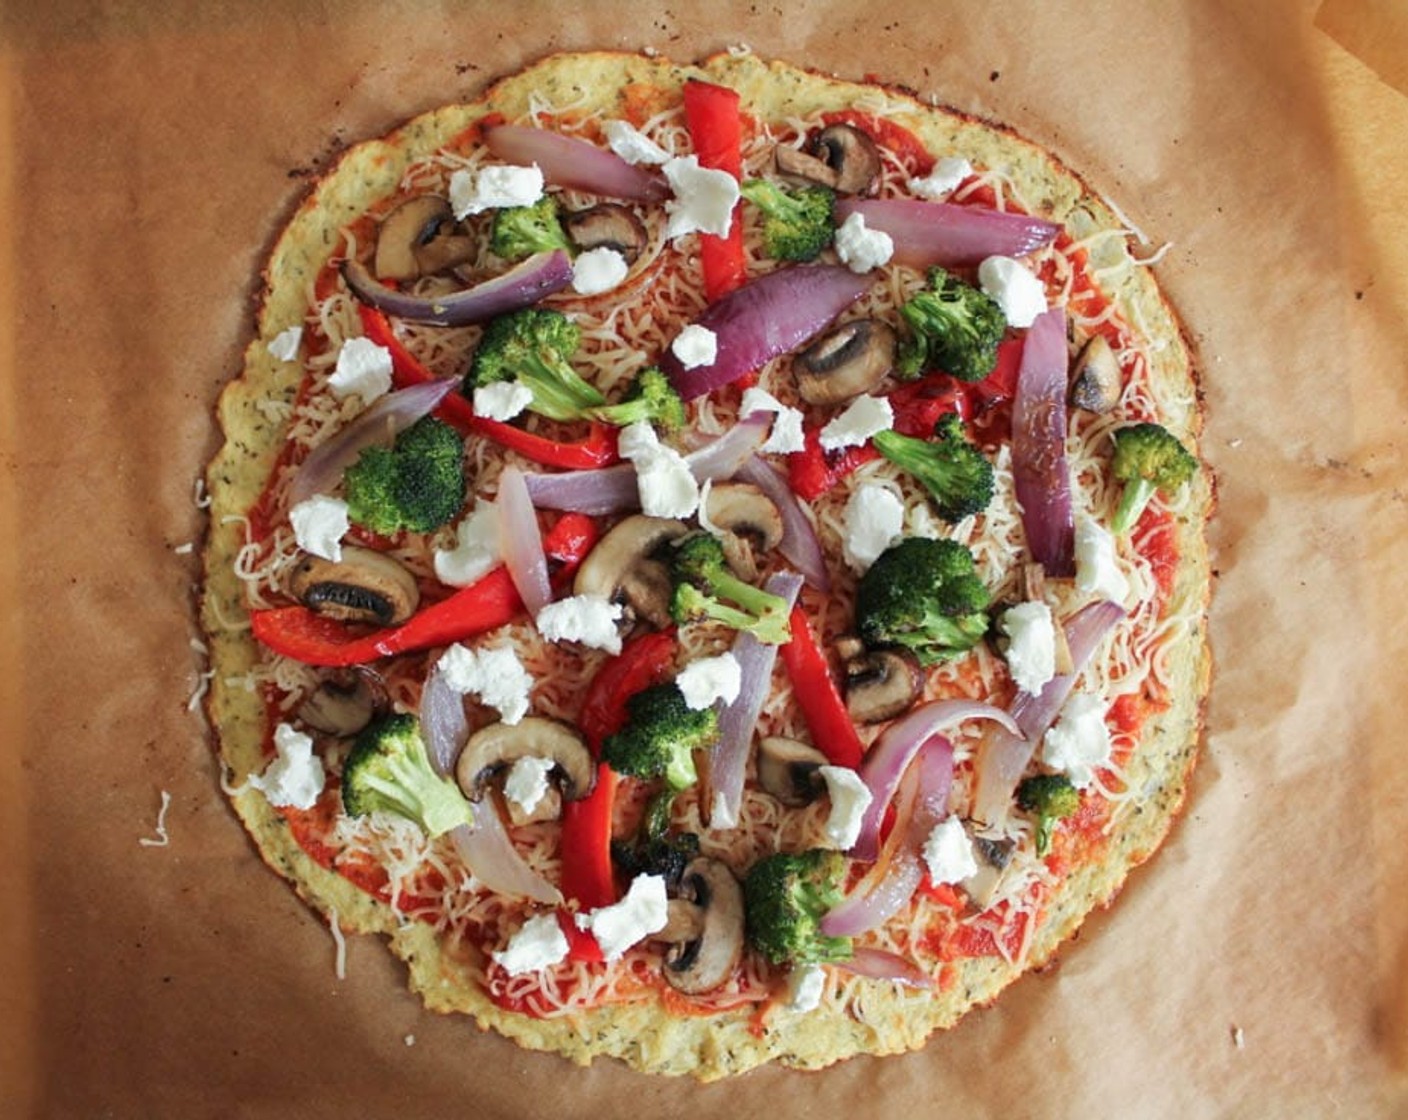 step 15 Spread the Pizza Sauce (1/4 cup) over the pizza dough and sprinkle with an even layer of Shredded Part-Skim Mozzarella Cheese (1/2 cup). Top with the roasted vegetables, sautéed mushrooms, and Goat Cheese (2 Tbsp).